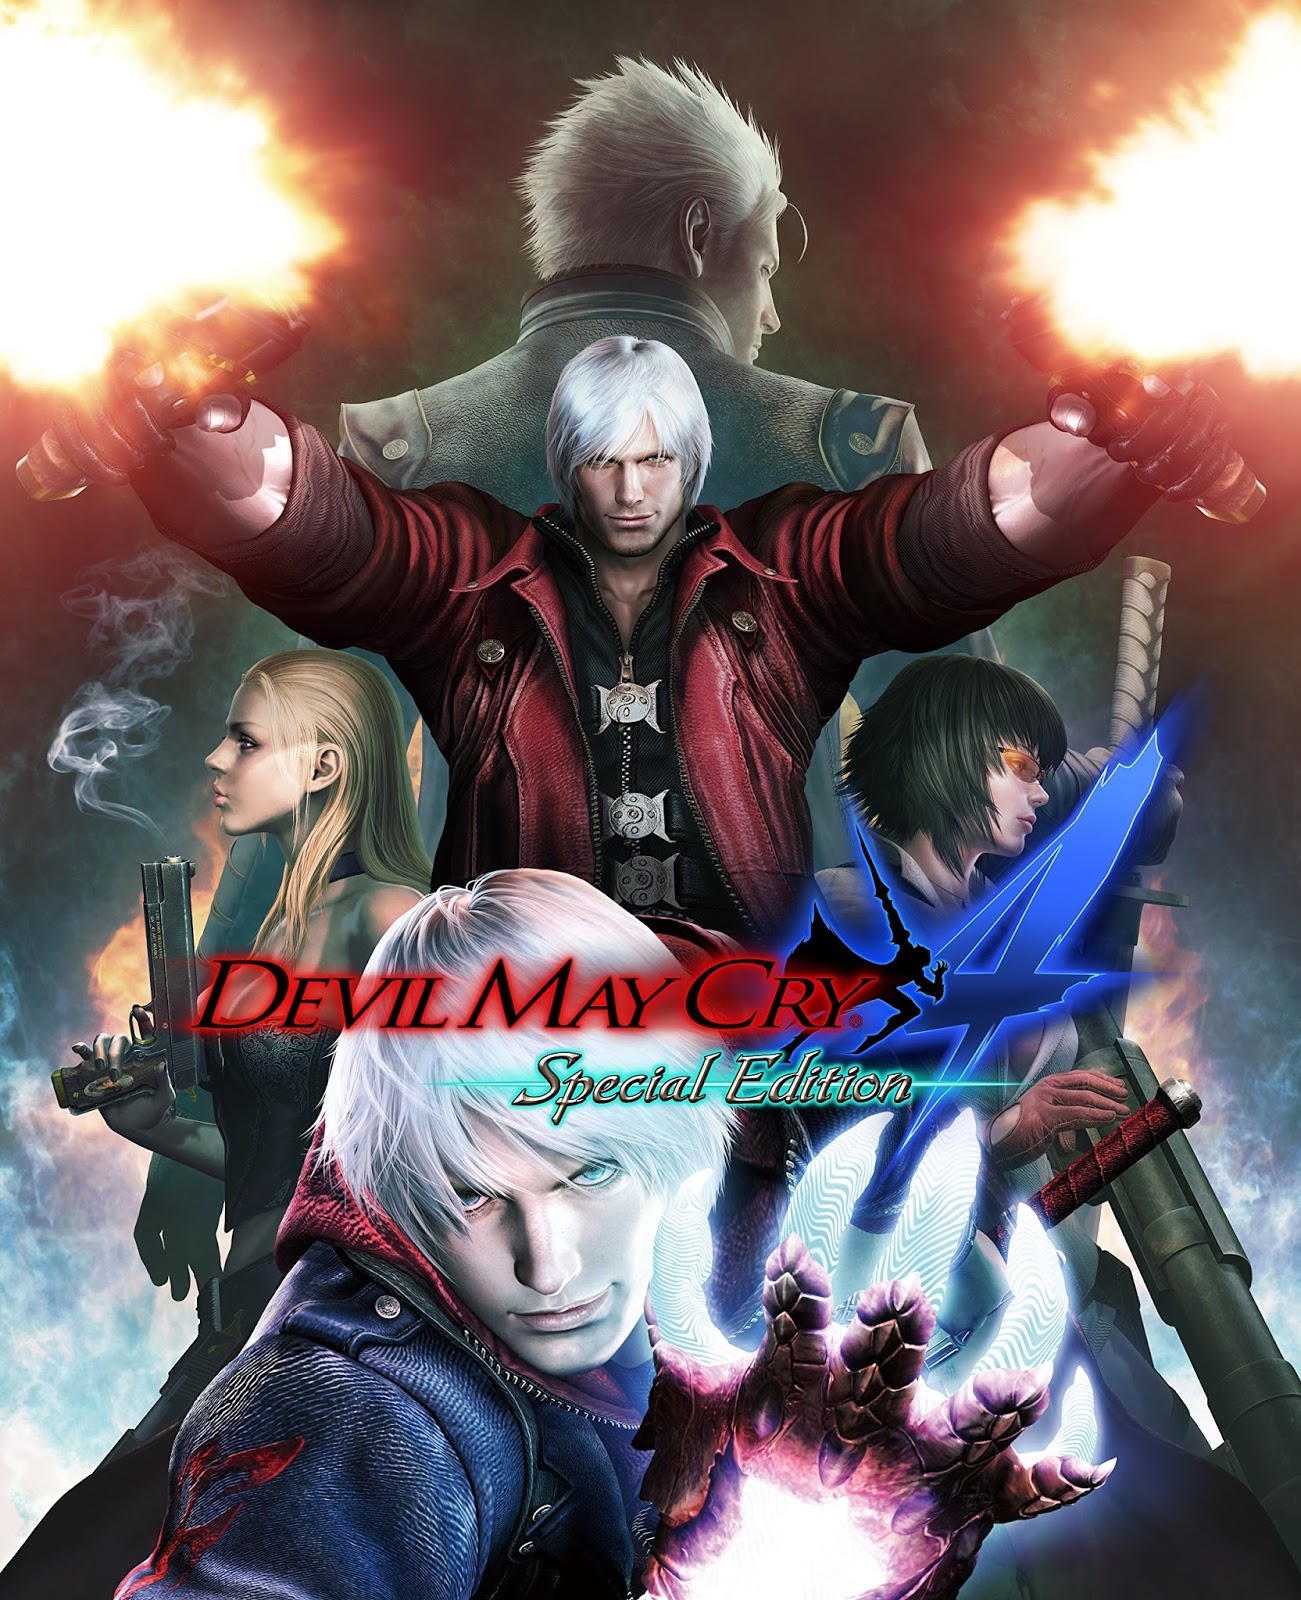 Devil may cry free download